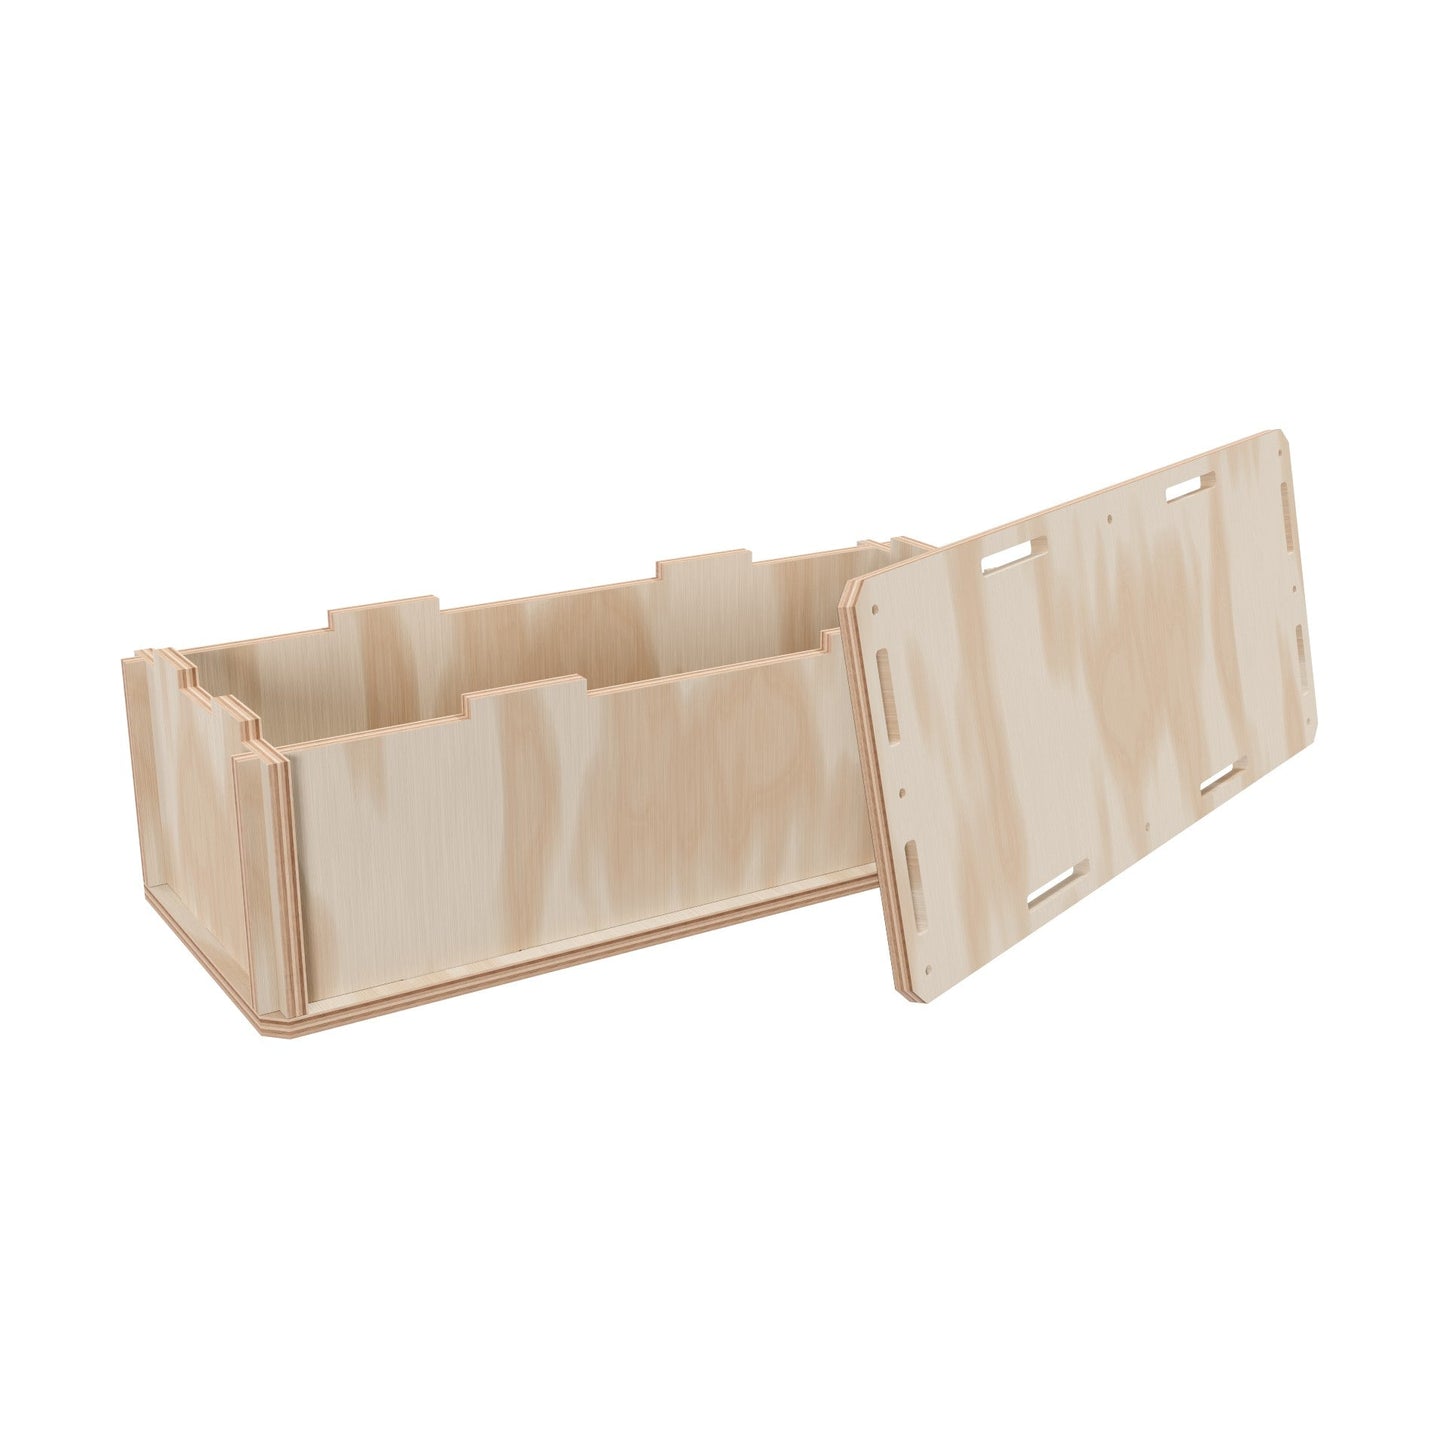 Plywood Shipping Crate 24x10x7